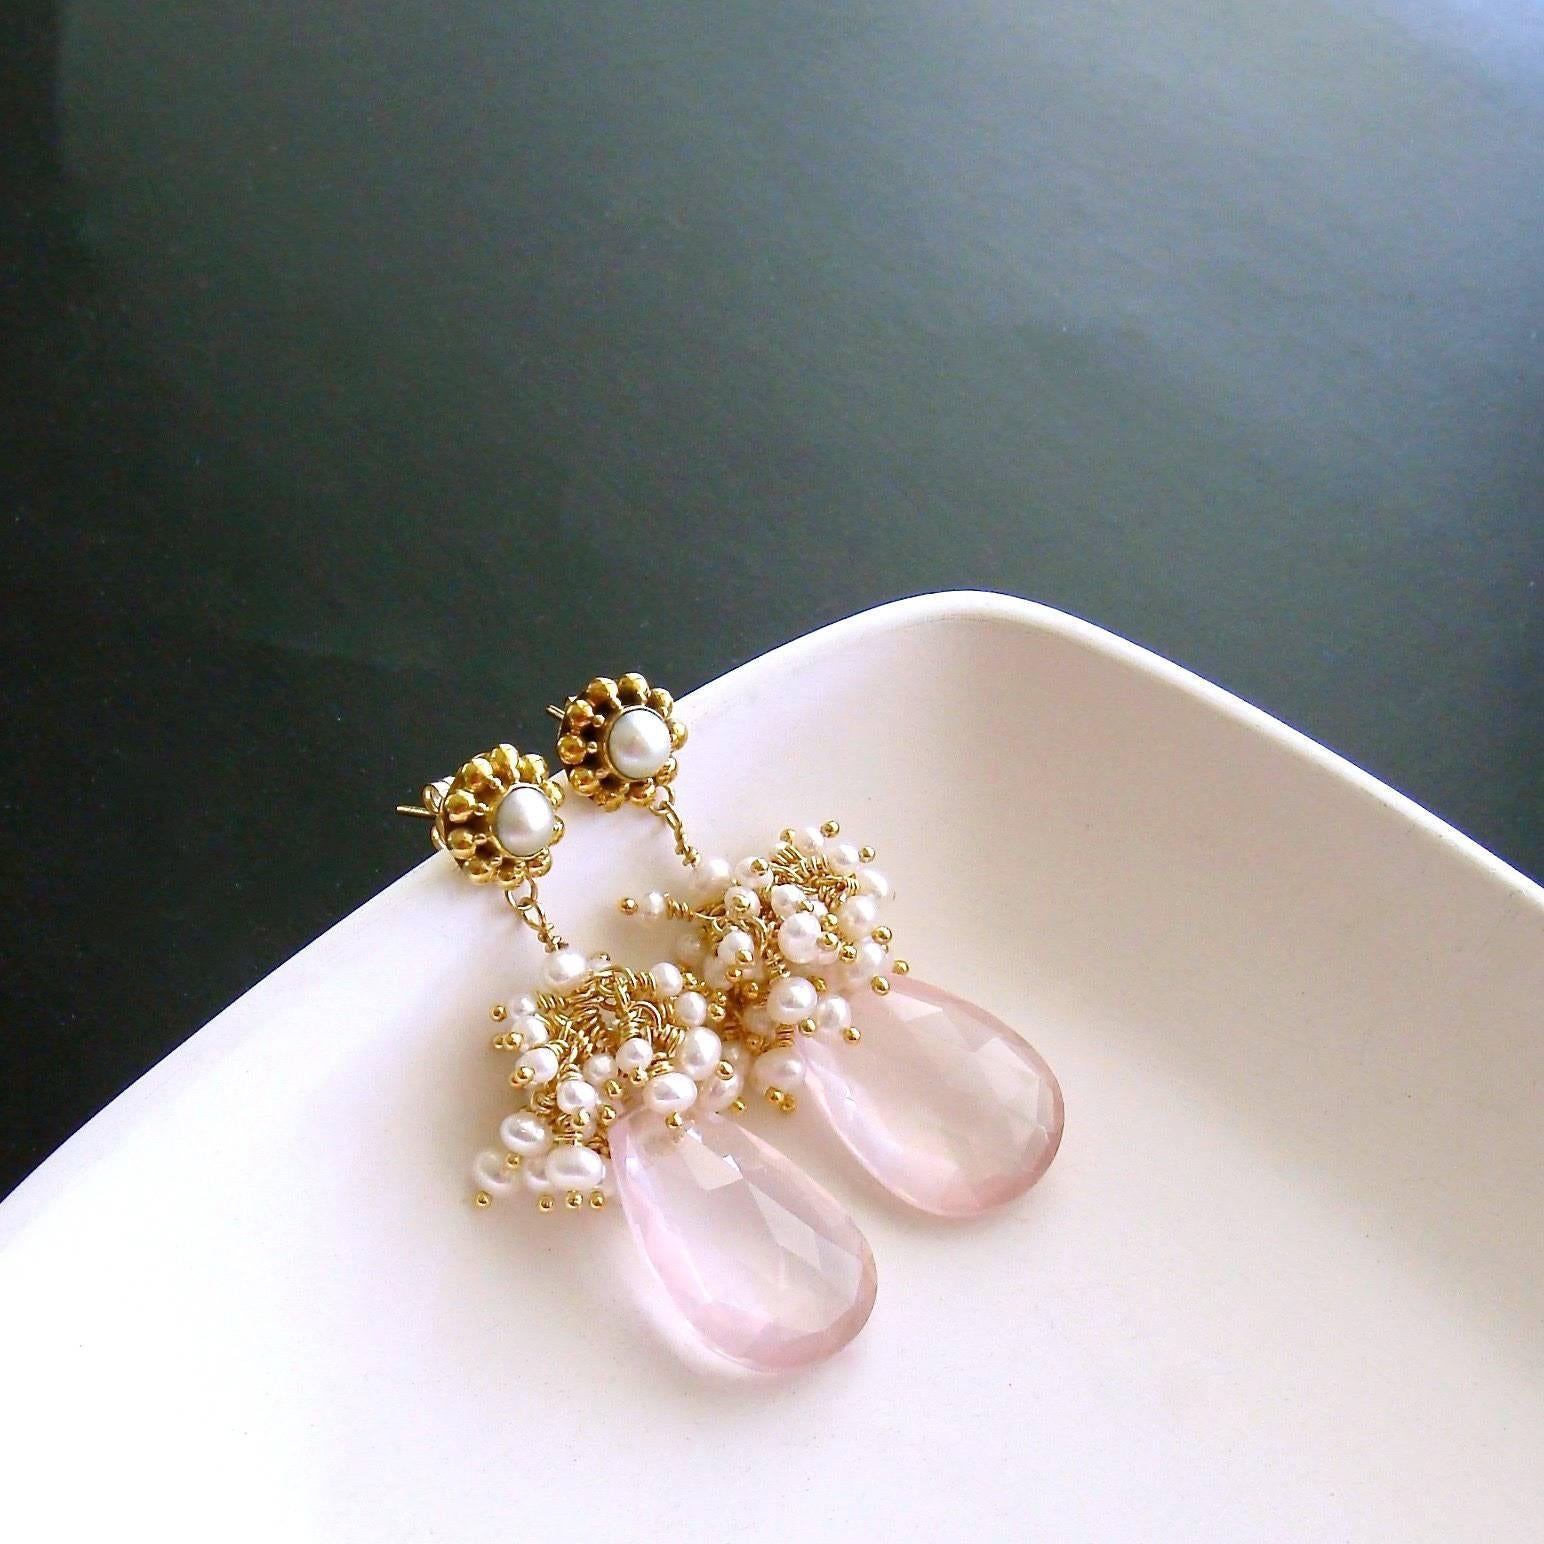 Delicate blush pink and diaphanous faceted rose quartz pear-shaped briolettes are crowned with a frothy explosion of creamy white seed pearls to create a traditional, yet uniquely feminine, pair of  earrings. This ladylike design is suspended from a